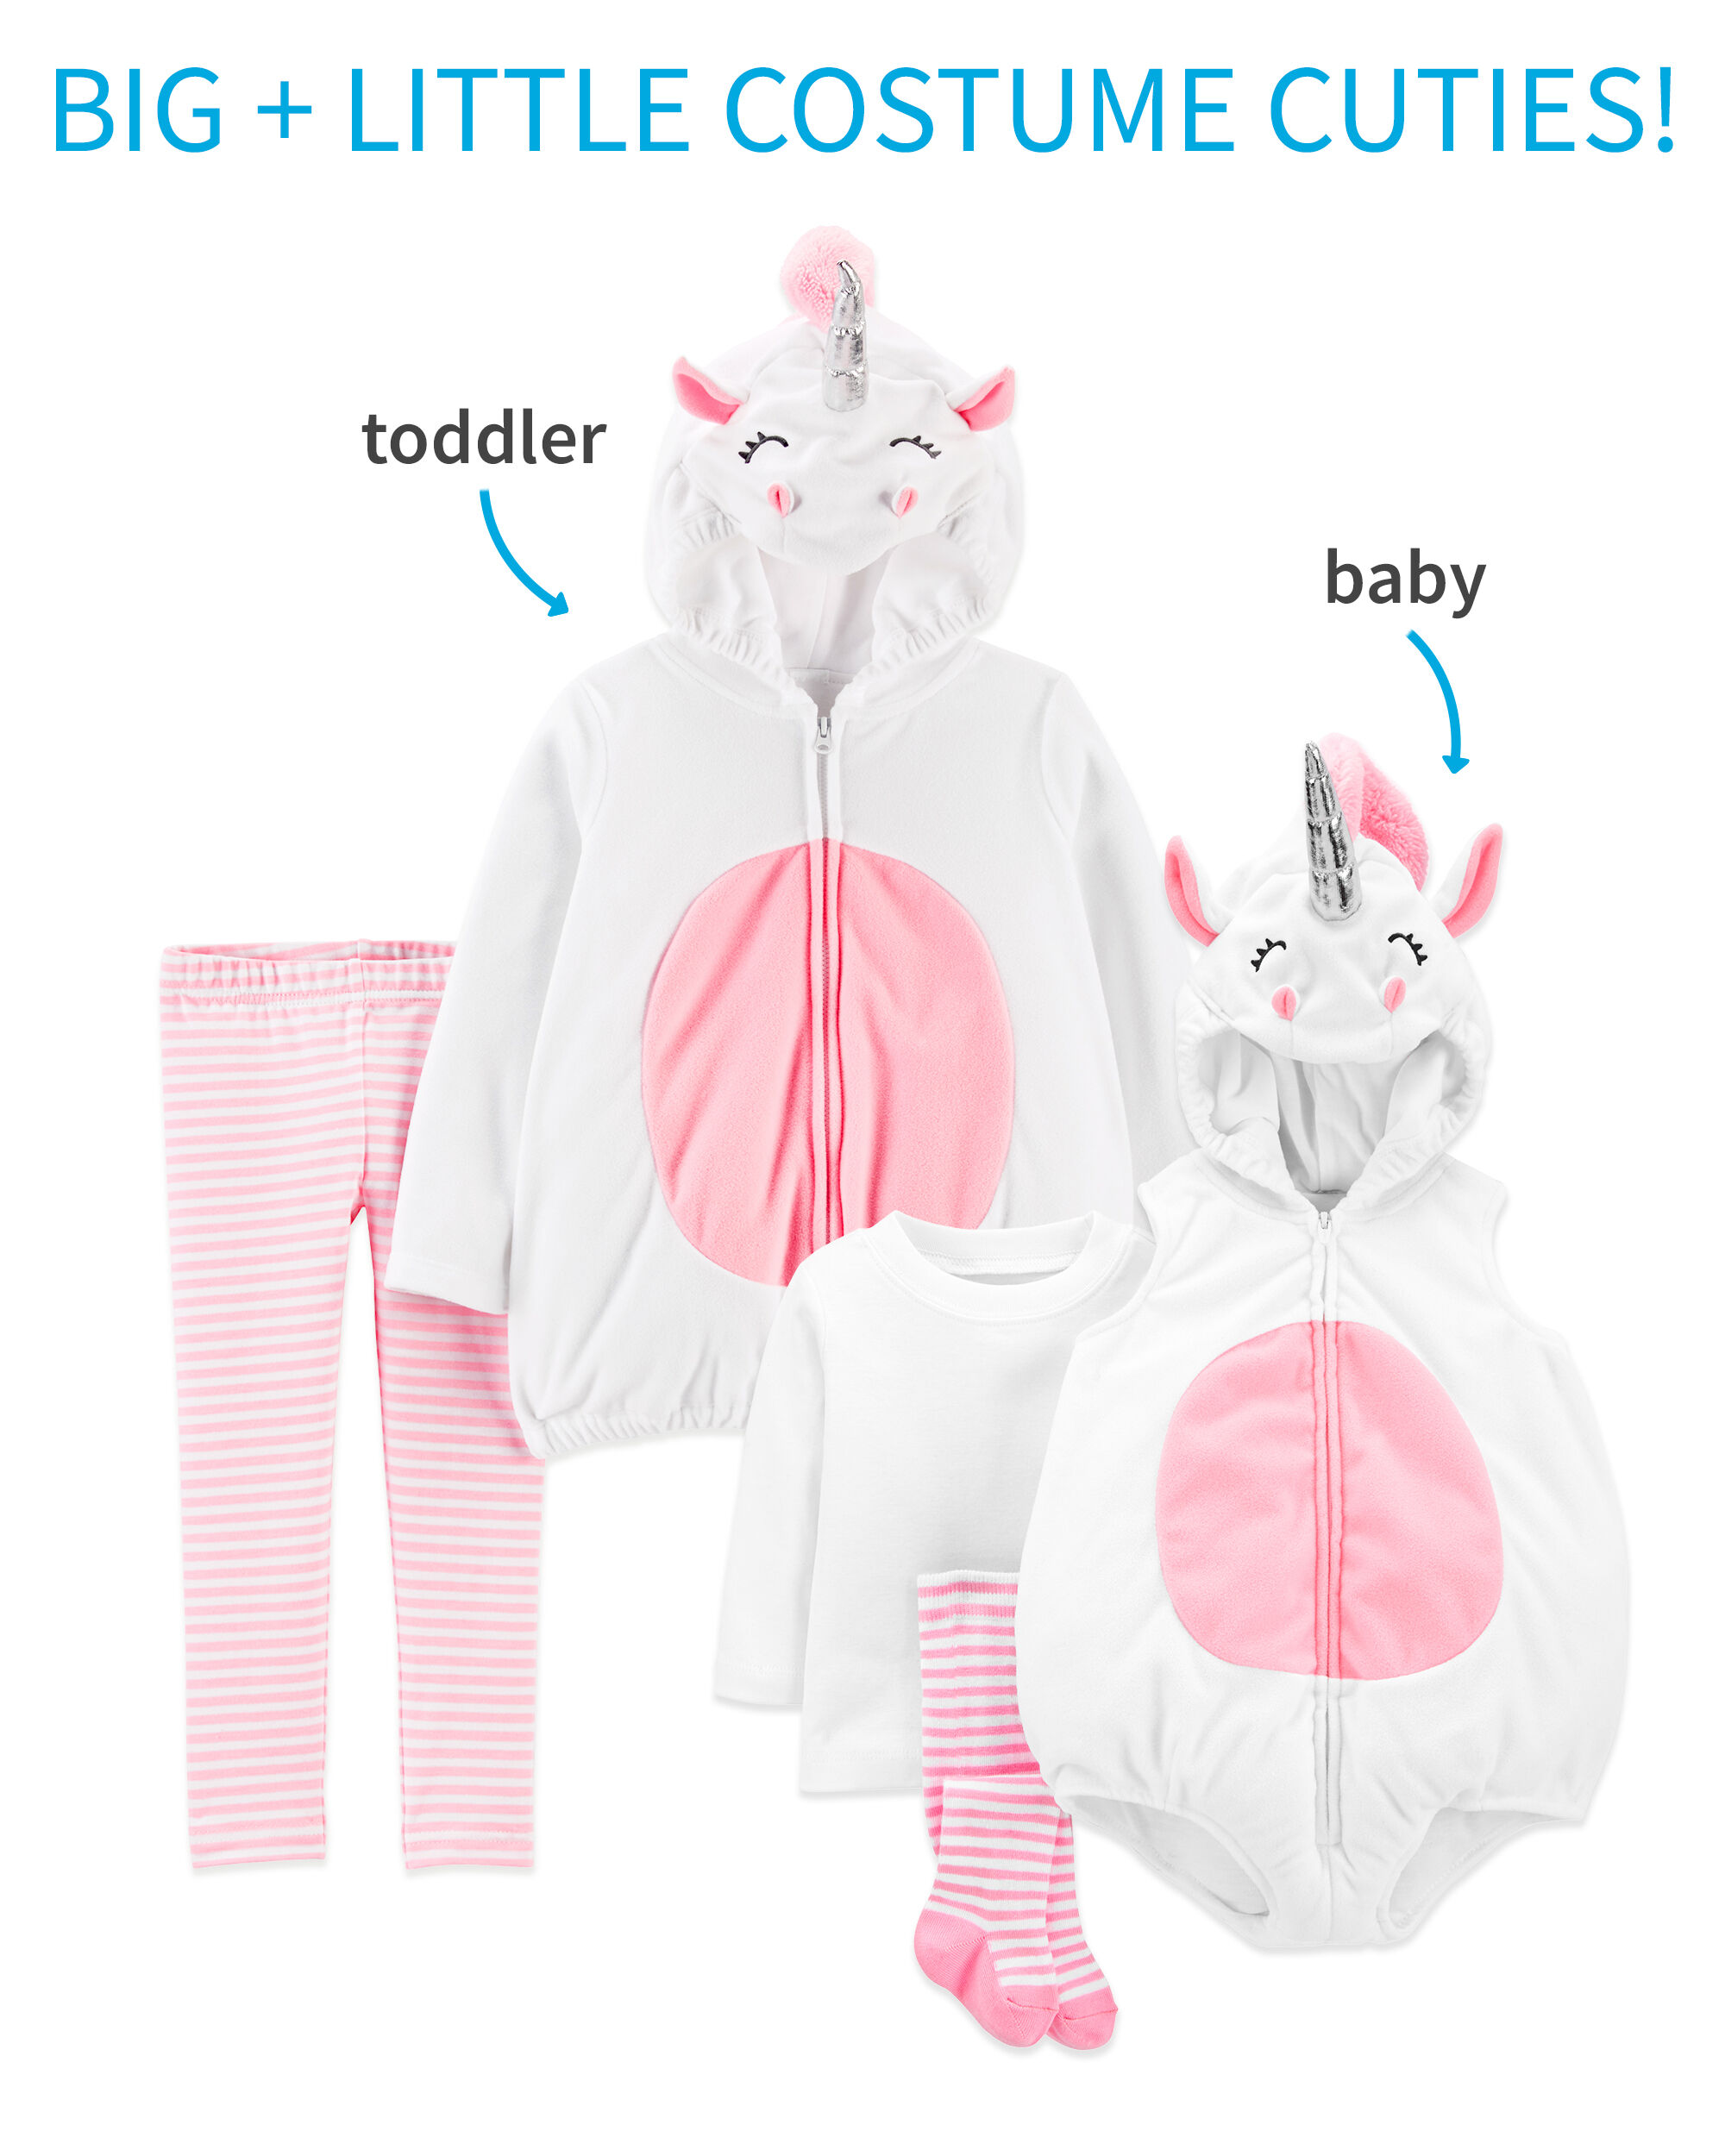 carter's unicorn outfit